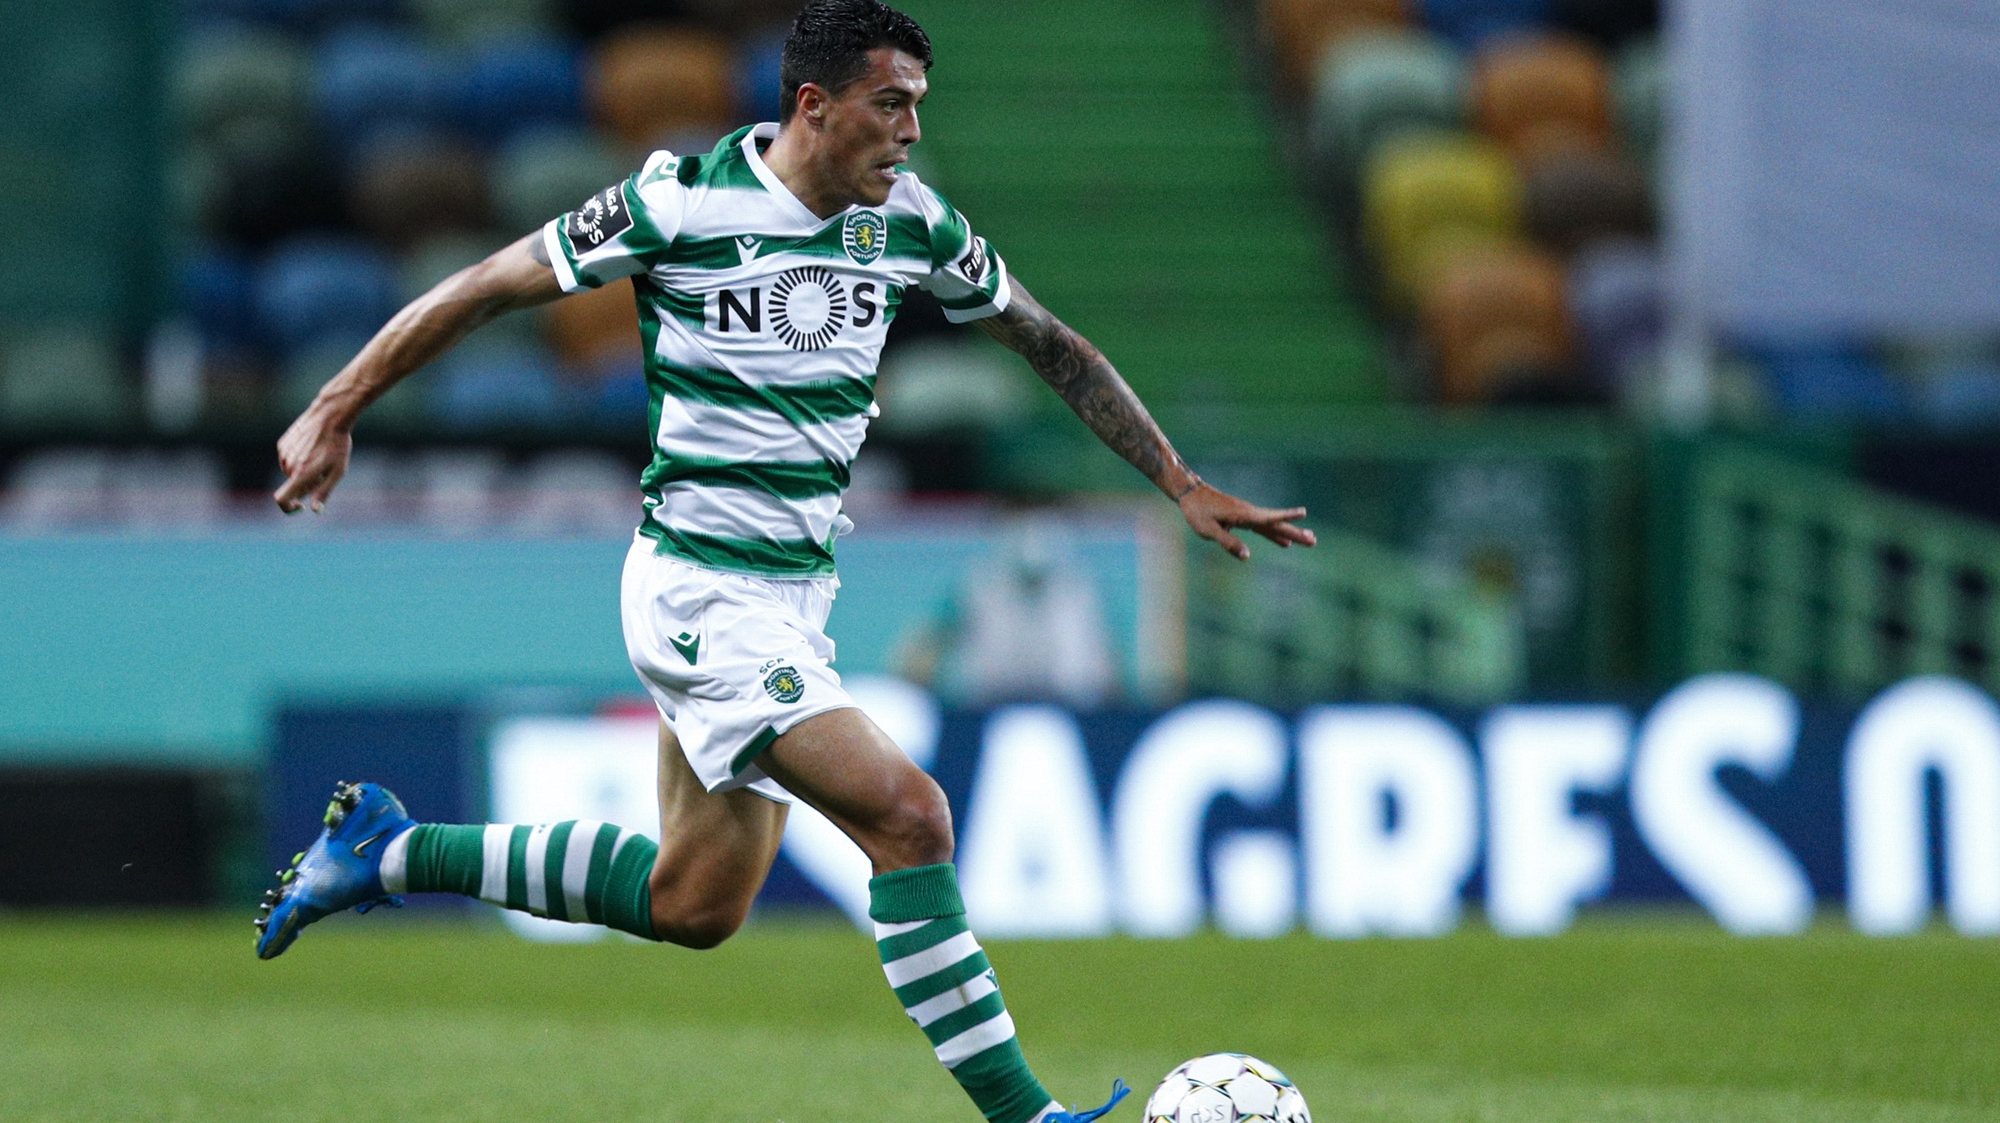 Sporting´s player  Pedro Porro, in action during their Portuguese First League soccer match held at Alvalade Stadium in Lisbon, Portugal, 21st April 2021.  ANTONIO COTRIM/LUSA